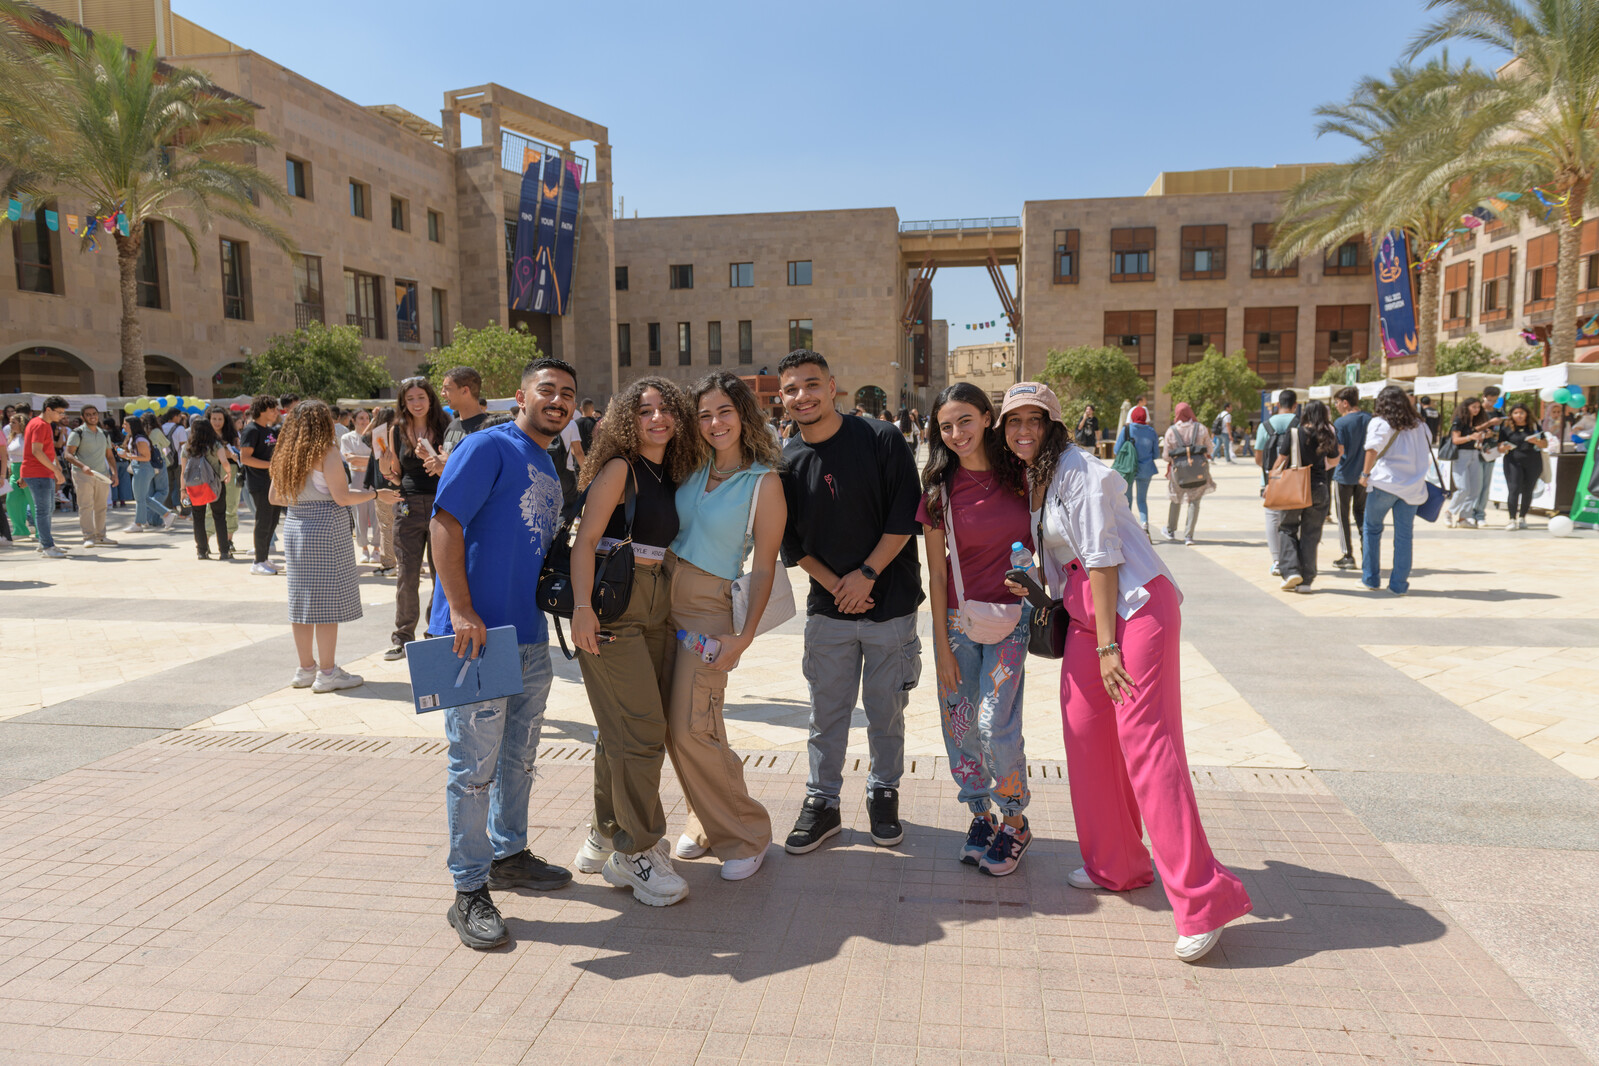 students on campus